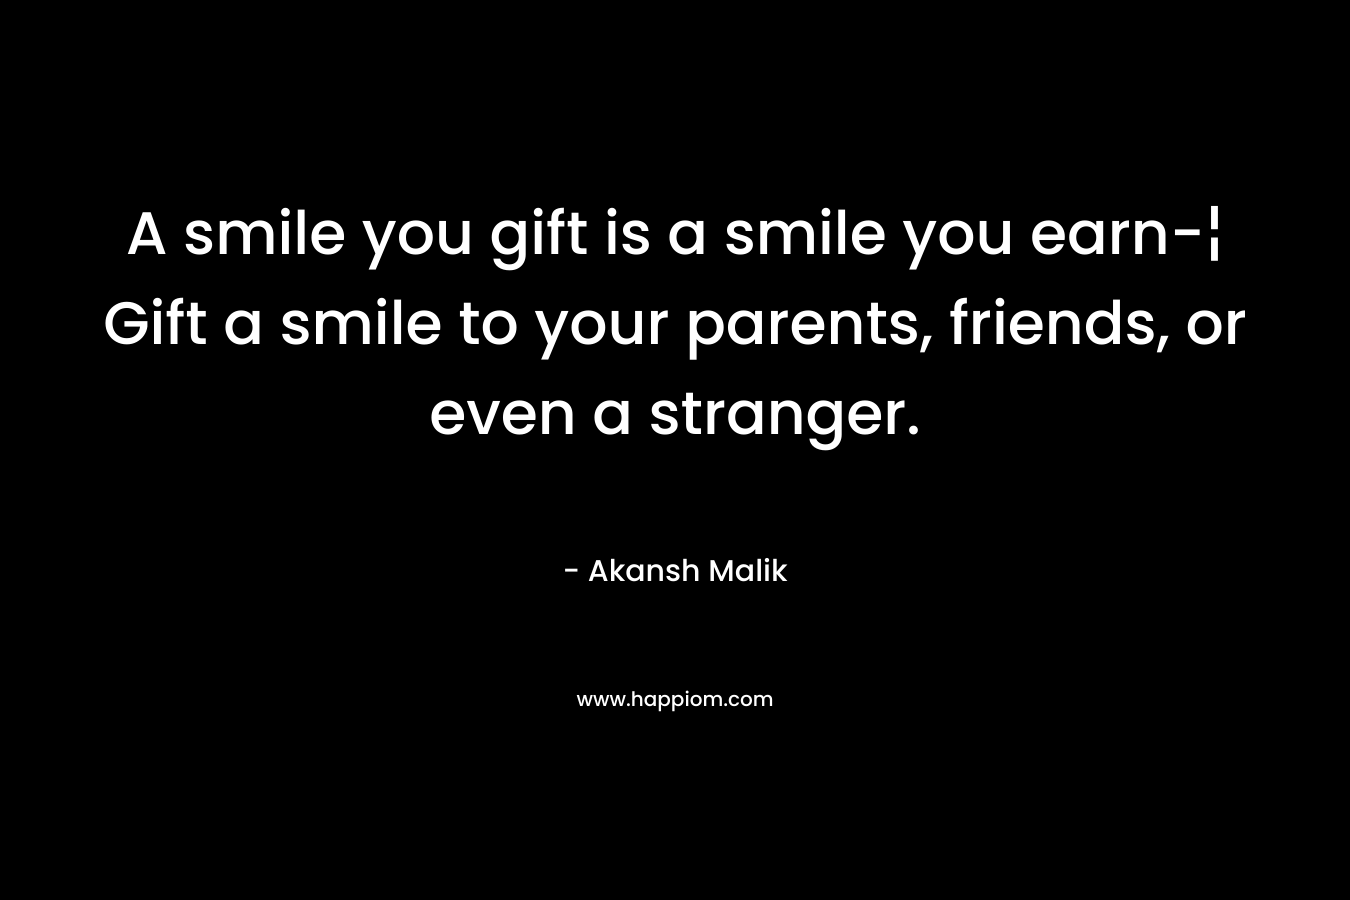 A smile you gift is a smile you earn-¦ Gift a smile to your parents, friends, or even a stranger.